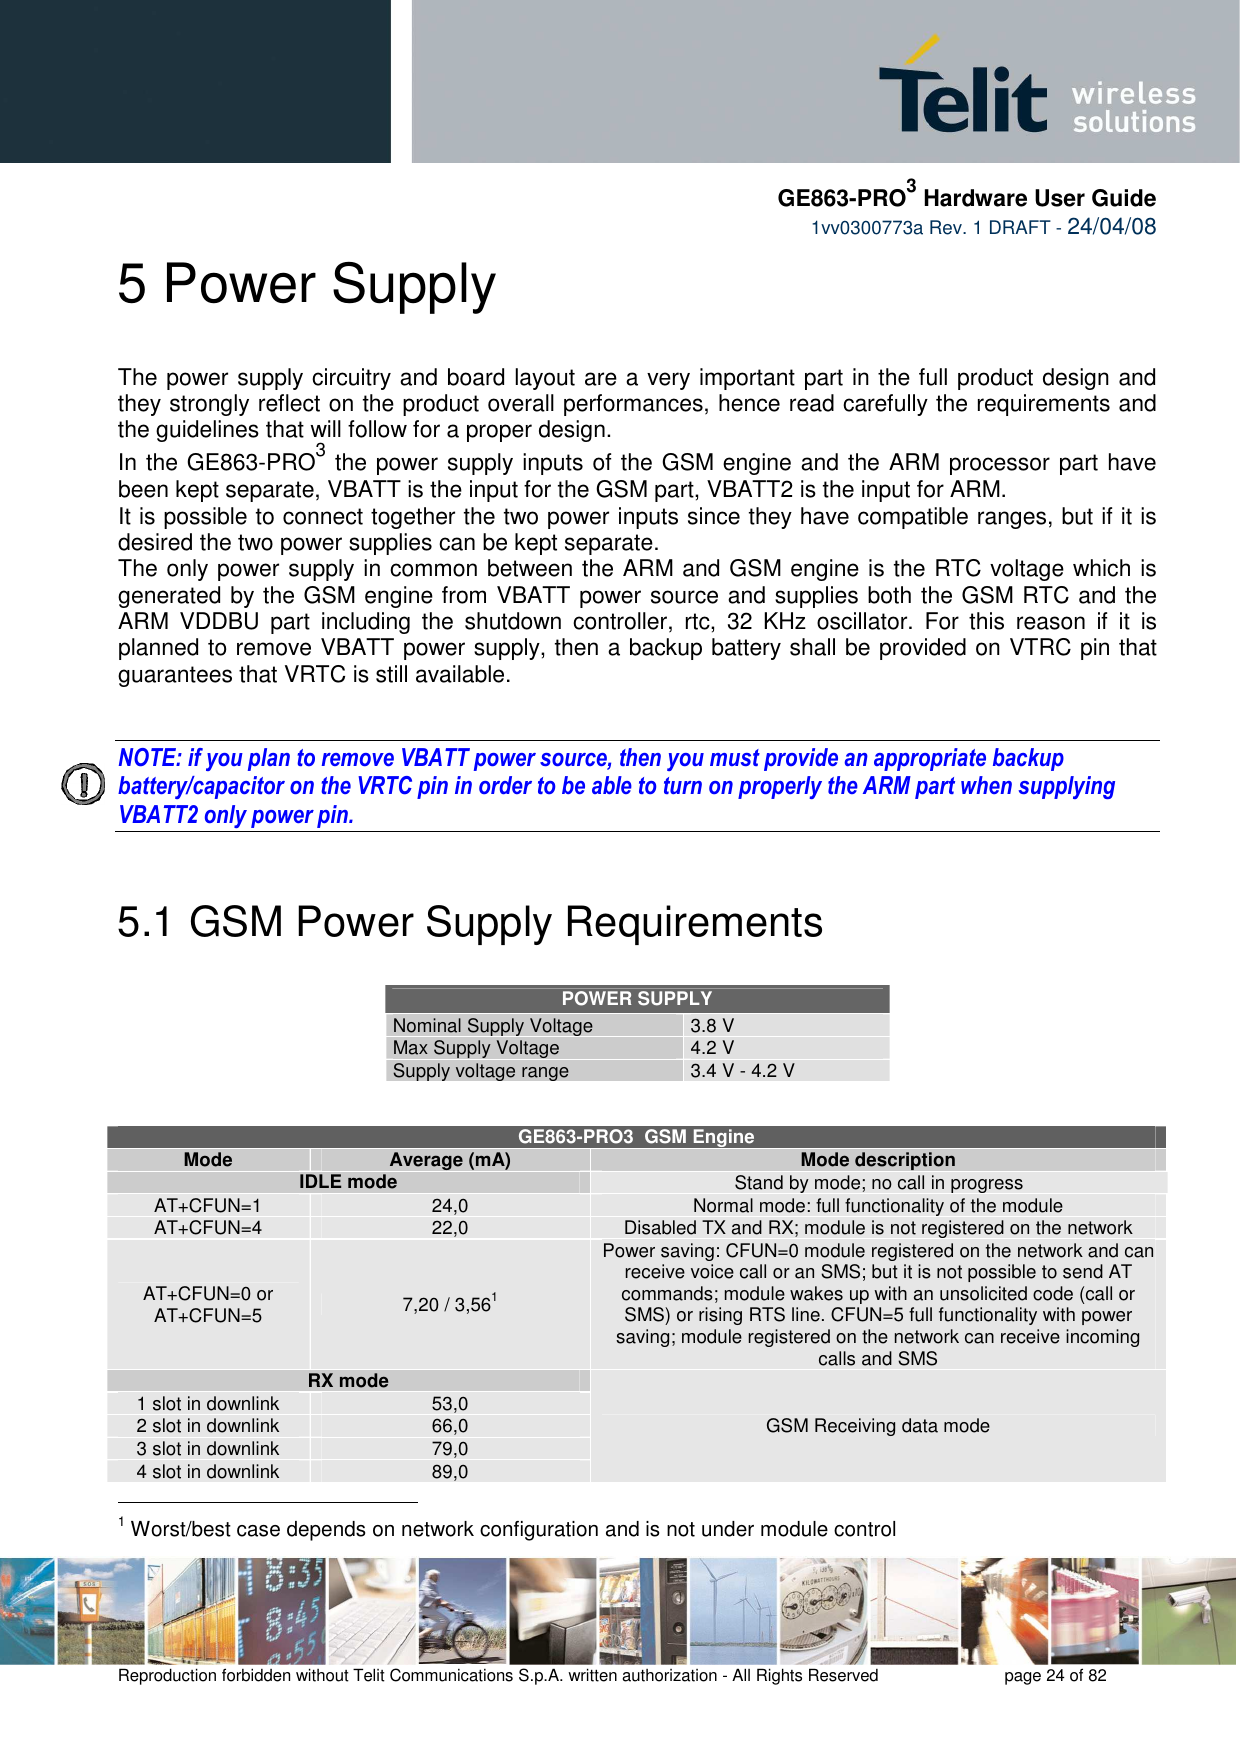     GE863-PRO3 Hardware User Guide  1vv0300773a Rev. 1 DRAFT - 24/04/08    Reproduction forbidden without Telit Communications S.p.A. written authorization - All Rights Reserved    page 24 of 82  5 Power Supply The power supply circuitry and board layout are a very important part in the full product design and they strongly reflect on the product overall performances, hence read carefully the requirements and the guidelines that will follow for a proper design. In the GE863-PRO3 the power supply inputs of the GSM engine and the ARM processor part have been kept separate, VBATT is the input for the GSM part, VBATT2 is the input for ARM. It is possible to connect together the two power inputs since they have compatible ranges, but if it is desired the two power supplies can be kept separate.  The only power supply in common between the ARM and GSM engine is the RTC voltage which is generated by the GSM engine from VBATT power source and supplies both the GSM RTC and the ARM  VDDBU  part  including  the  shutdown  controller,  rtc,  32  KHz  oscillator.  For  this  reason  if  it  is planned to remove VBATT power supply, then a backup battery shall be provided on VTRC pin that guarantees that VRTC is still available.   NOTE: if you plan to remove VBATT power source, then you must provide an appropriate backup battery/capacitor on the VRTC pin in order to be able to turn on properly the ARM part when supplying VBATT2 only power pin.   5.1  GSM Power Supply Requirements  POWER SUPPLY Nominal Supply Voltage 3.8 V Max Supply Voltage 4.2 V Supply voltage range  3.4 V - 4.2 V   GE863-PRO3  GSM Engine Mode   Average (mA)  Mode description IDLE mode  Stand by mode; no call in progress AT+CFUN=1  24,0  Normal mode: full functionality of the module AT+CFUN=4  22,0  Disabled TX and RX; module is not registered on the network AT+CFUN=0 or AT+CFUN=5  7,20 / 3,561 Power saving: CFUN=0 module registered on the network and can receive voice call or an SMS; but it is not possible to send AT commands; module wakes up with an unsolicited code (call or SMS) or rising RTS line. CFUN=5 full functionality with power saving; module registered on the network can receive incoming calls and SMS  RX mode 1 slot in downlink  53,0 2 slot in downlink  66,0 3 slot in downlink  79,0 4 slot in downlink  89,0 GSM Receiving data mode                                                 1 Worst/best case depends on network configuration and is not under module control  